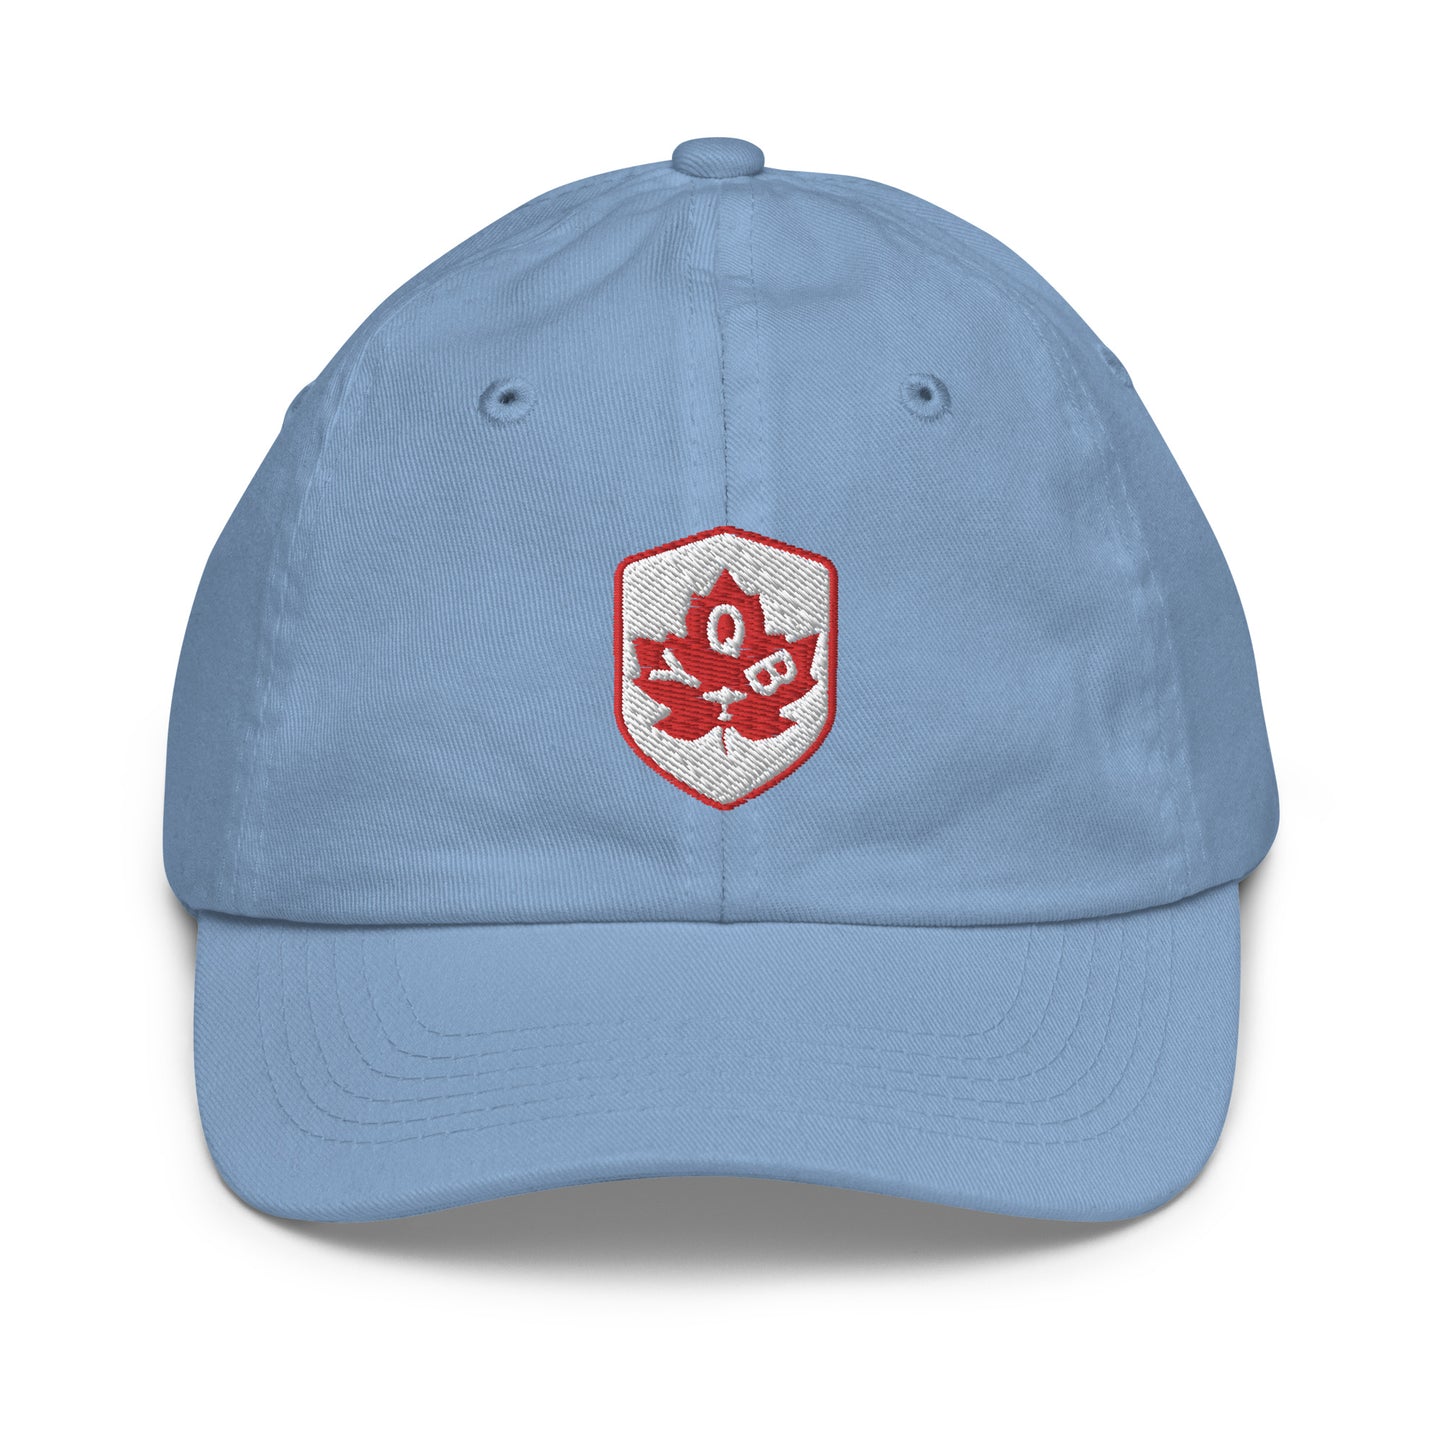 Maple Leaf Kid's Cap - Red/White • YQB Quebec City • YHM Designs - Image 20